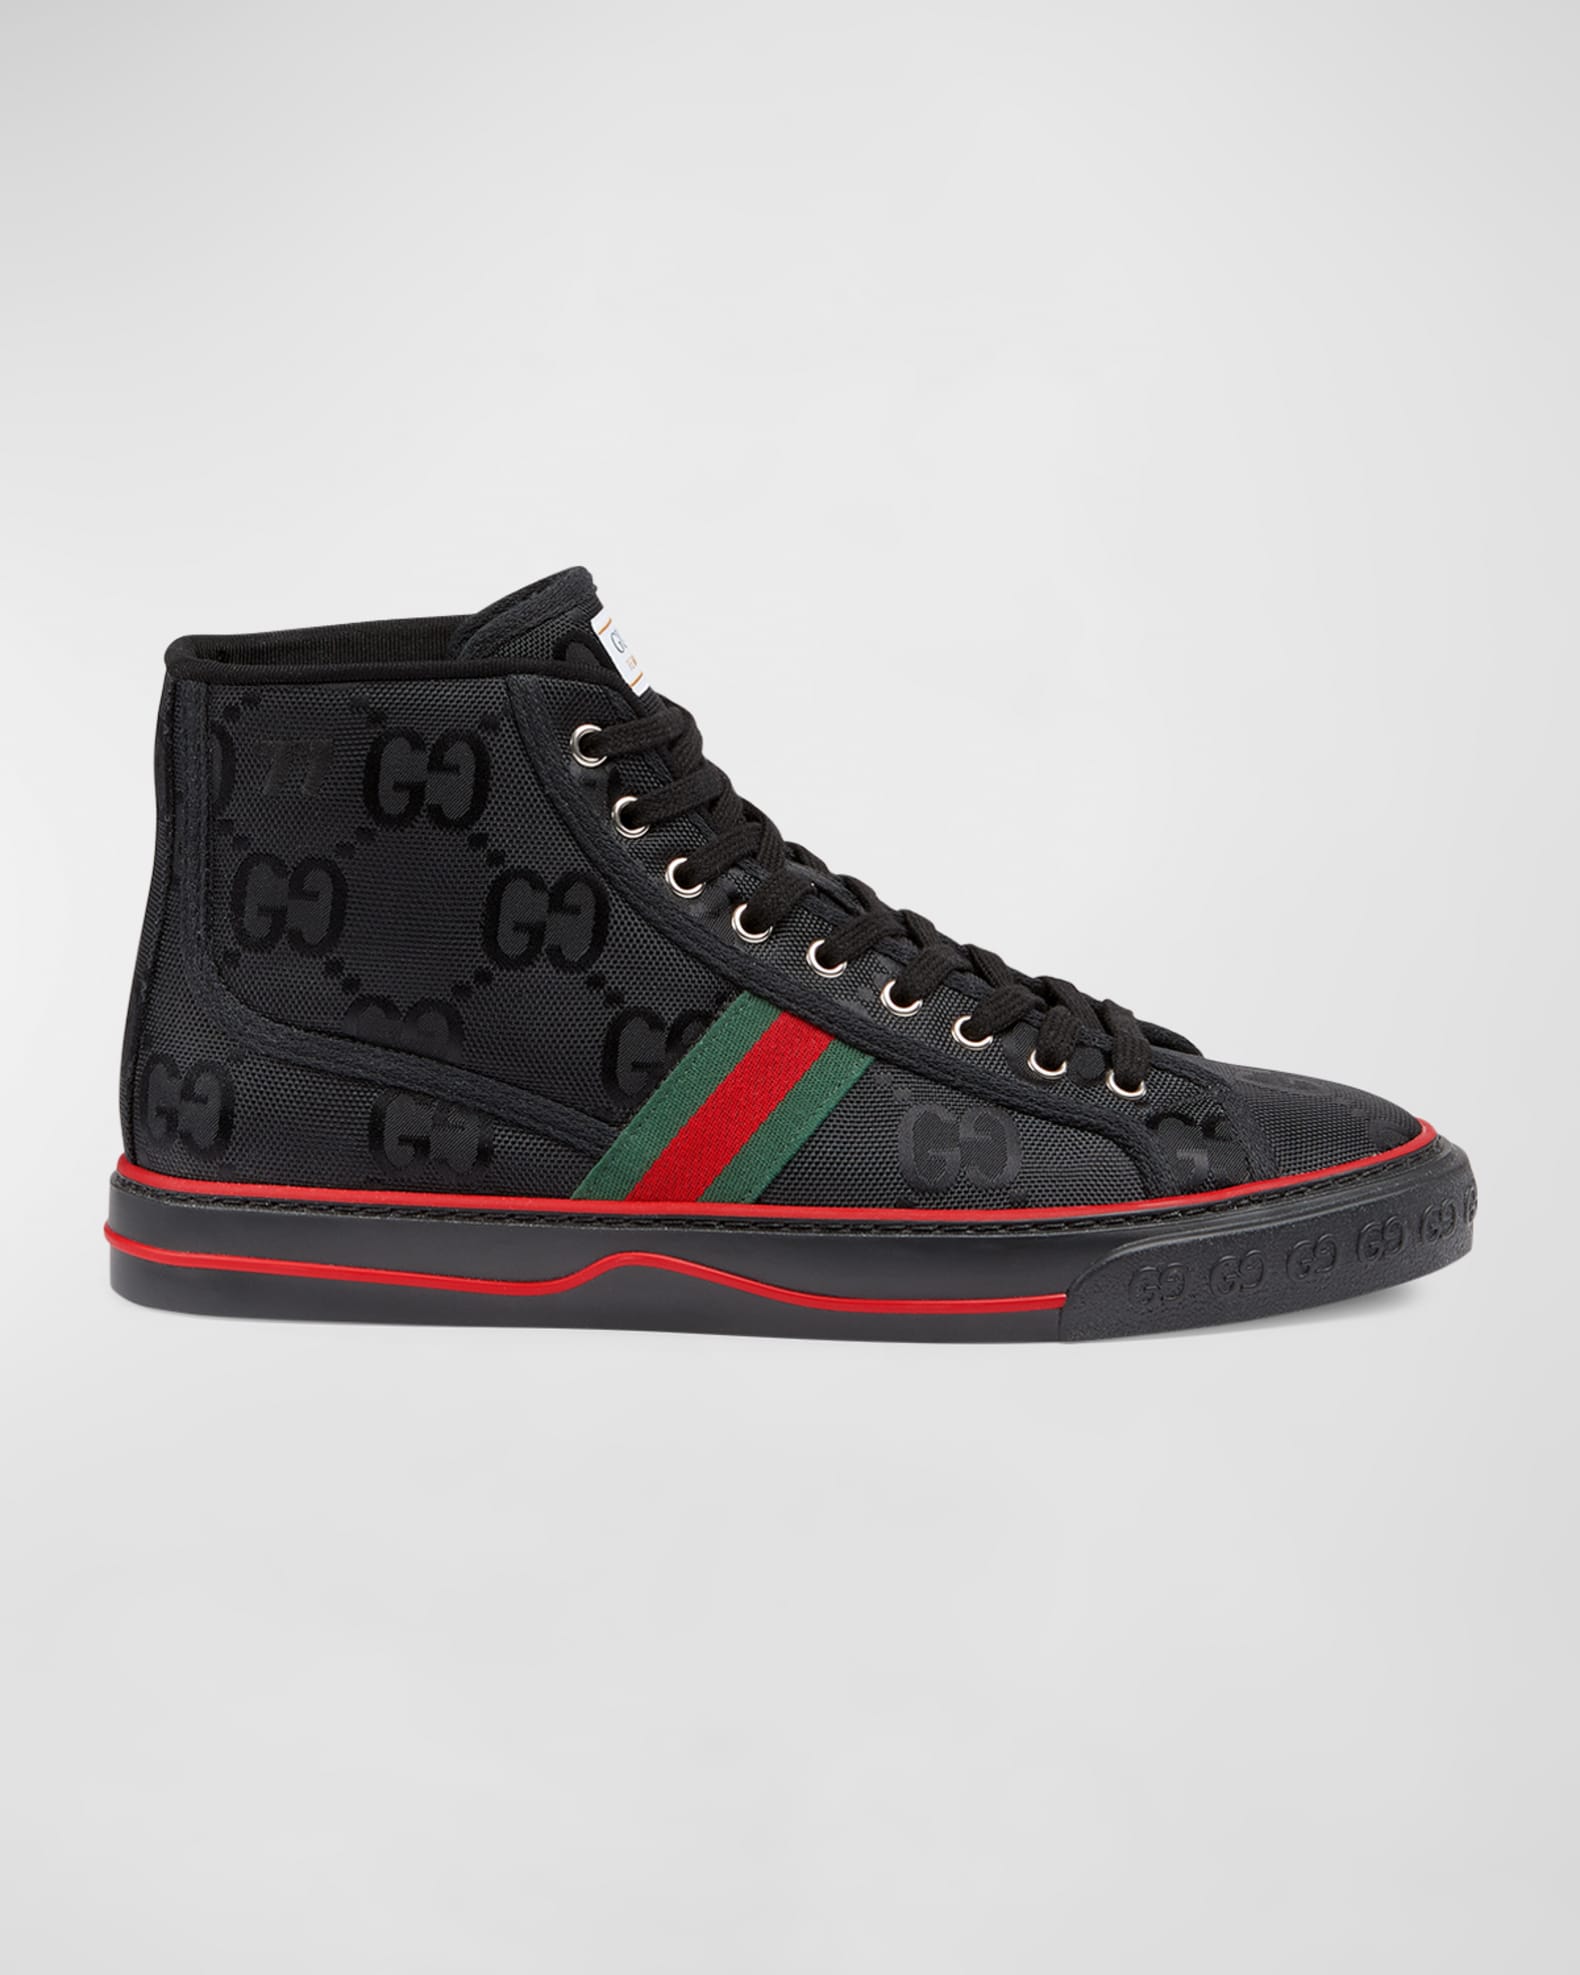 Gucci Men's Off The Grid High-Top Sneakers - Black Berry - Size 12